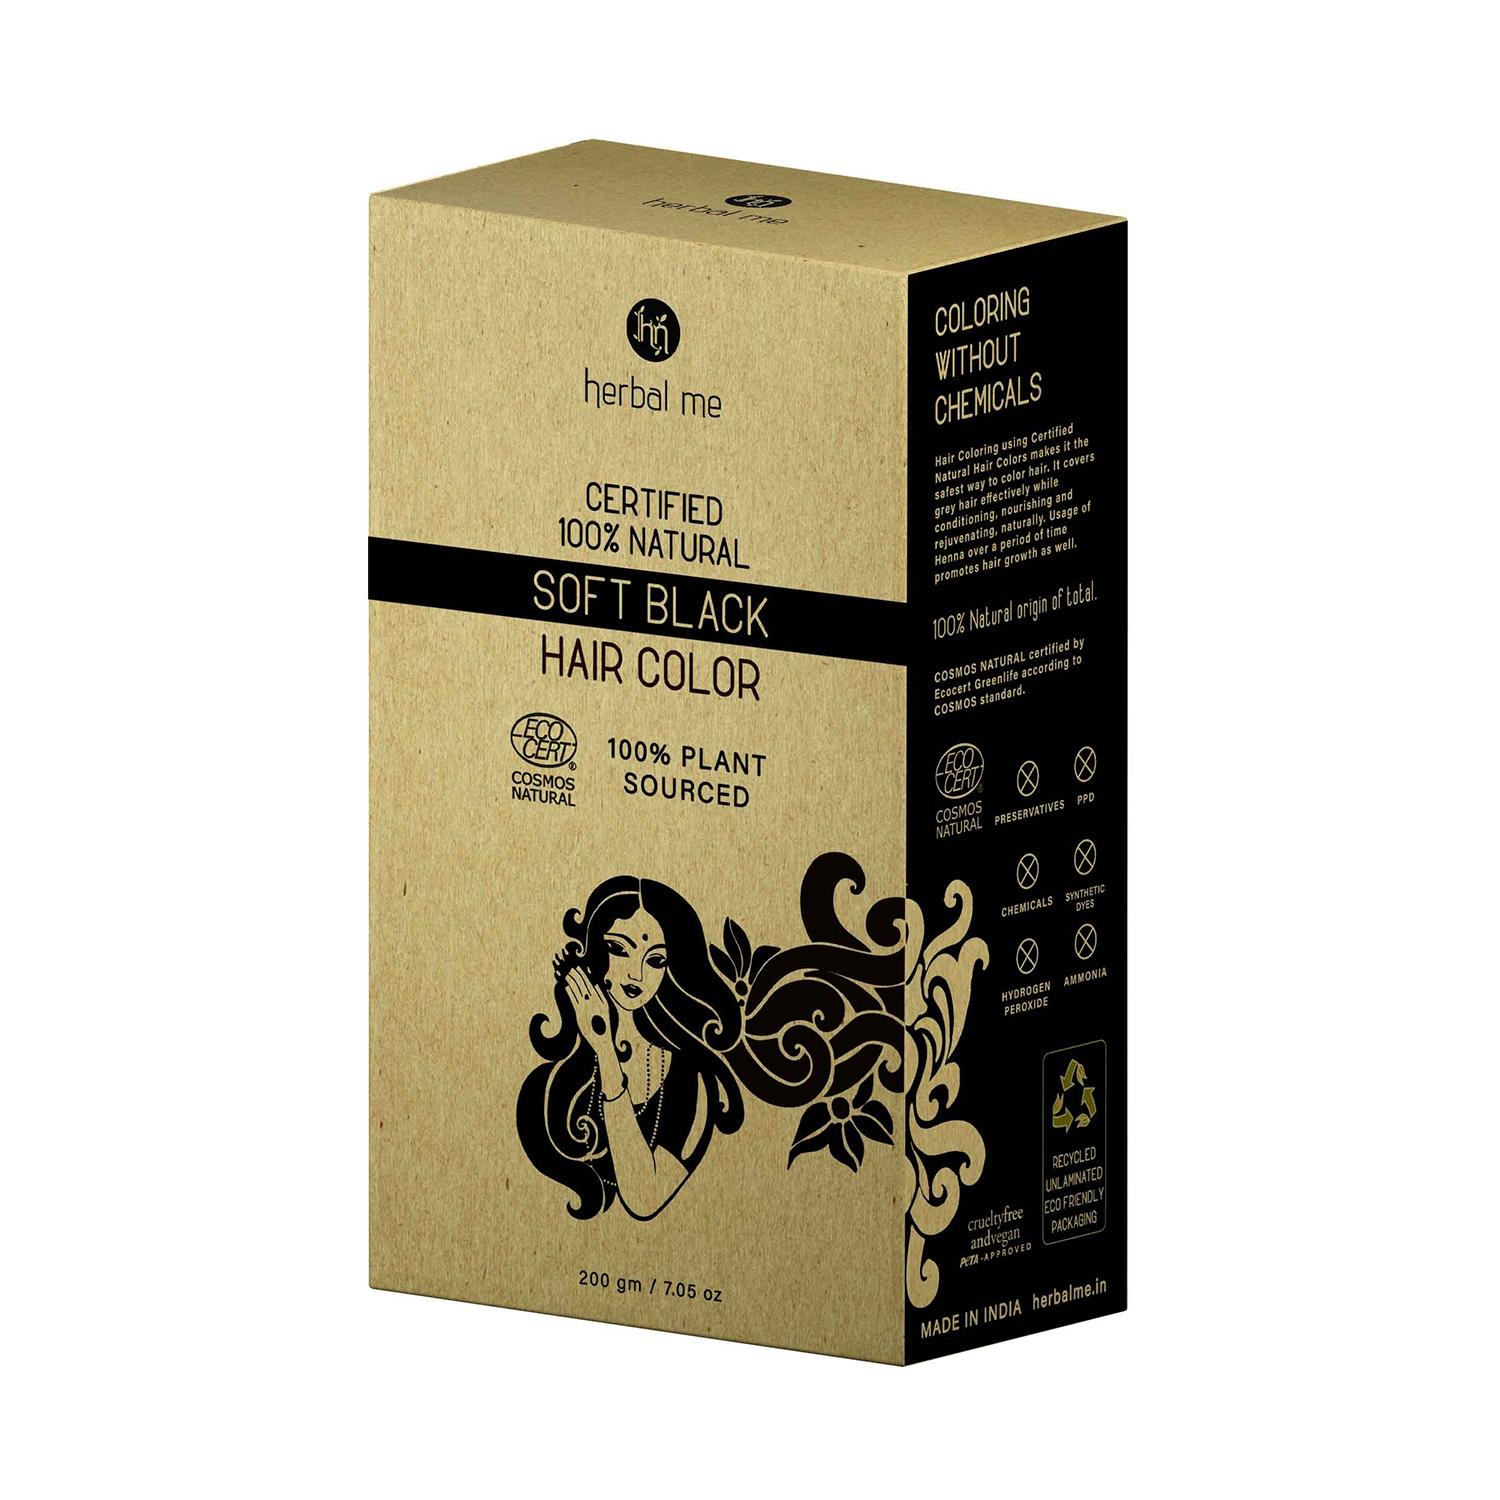 herbal me certified natural henna hair color - soft black (200g)